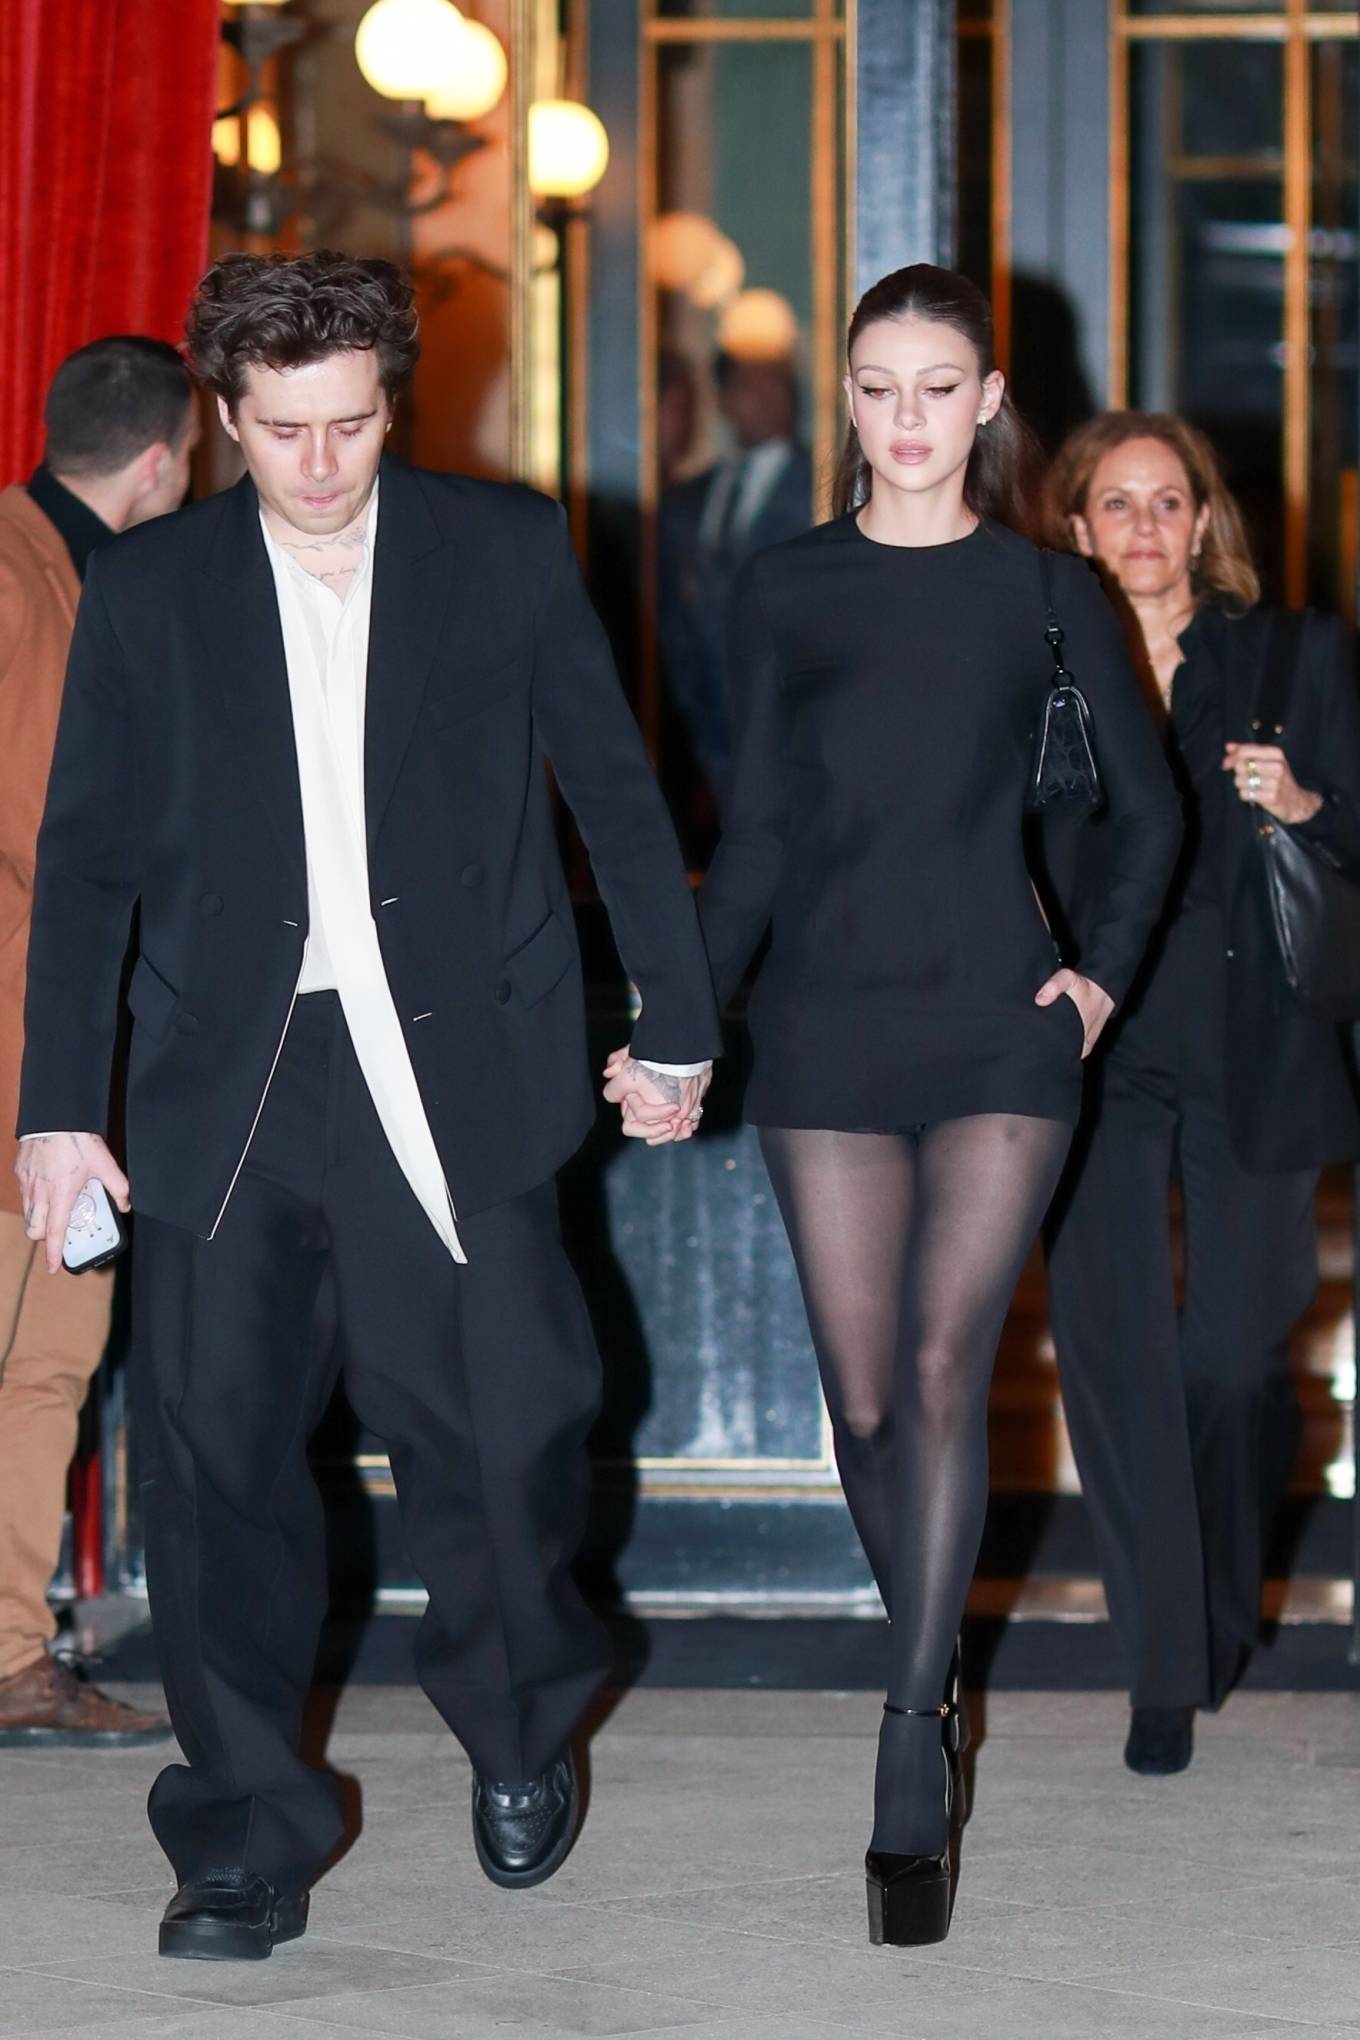 Nicola Peltz - Seen while leaving the Le Reserve Hotel in Paris